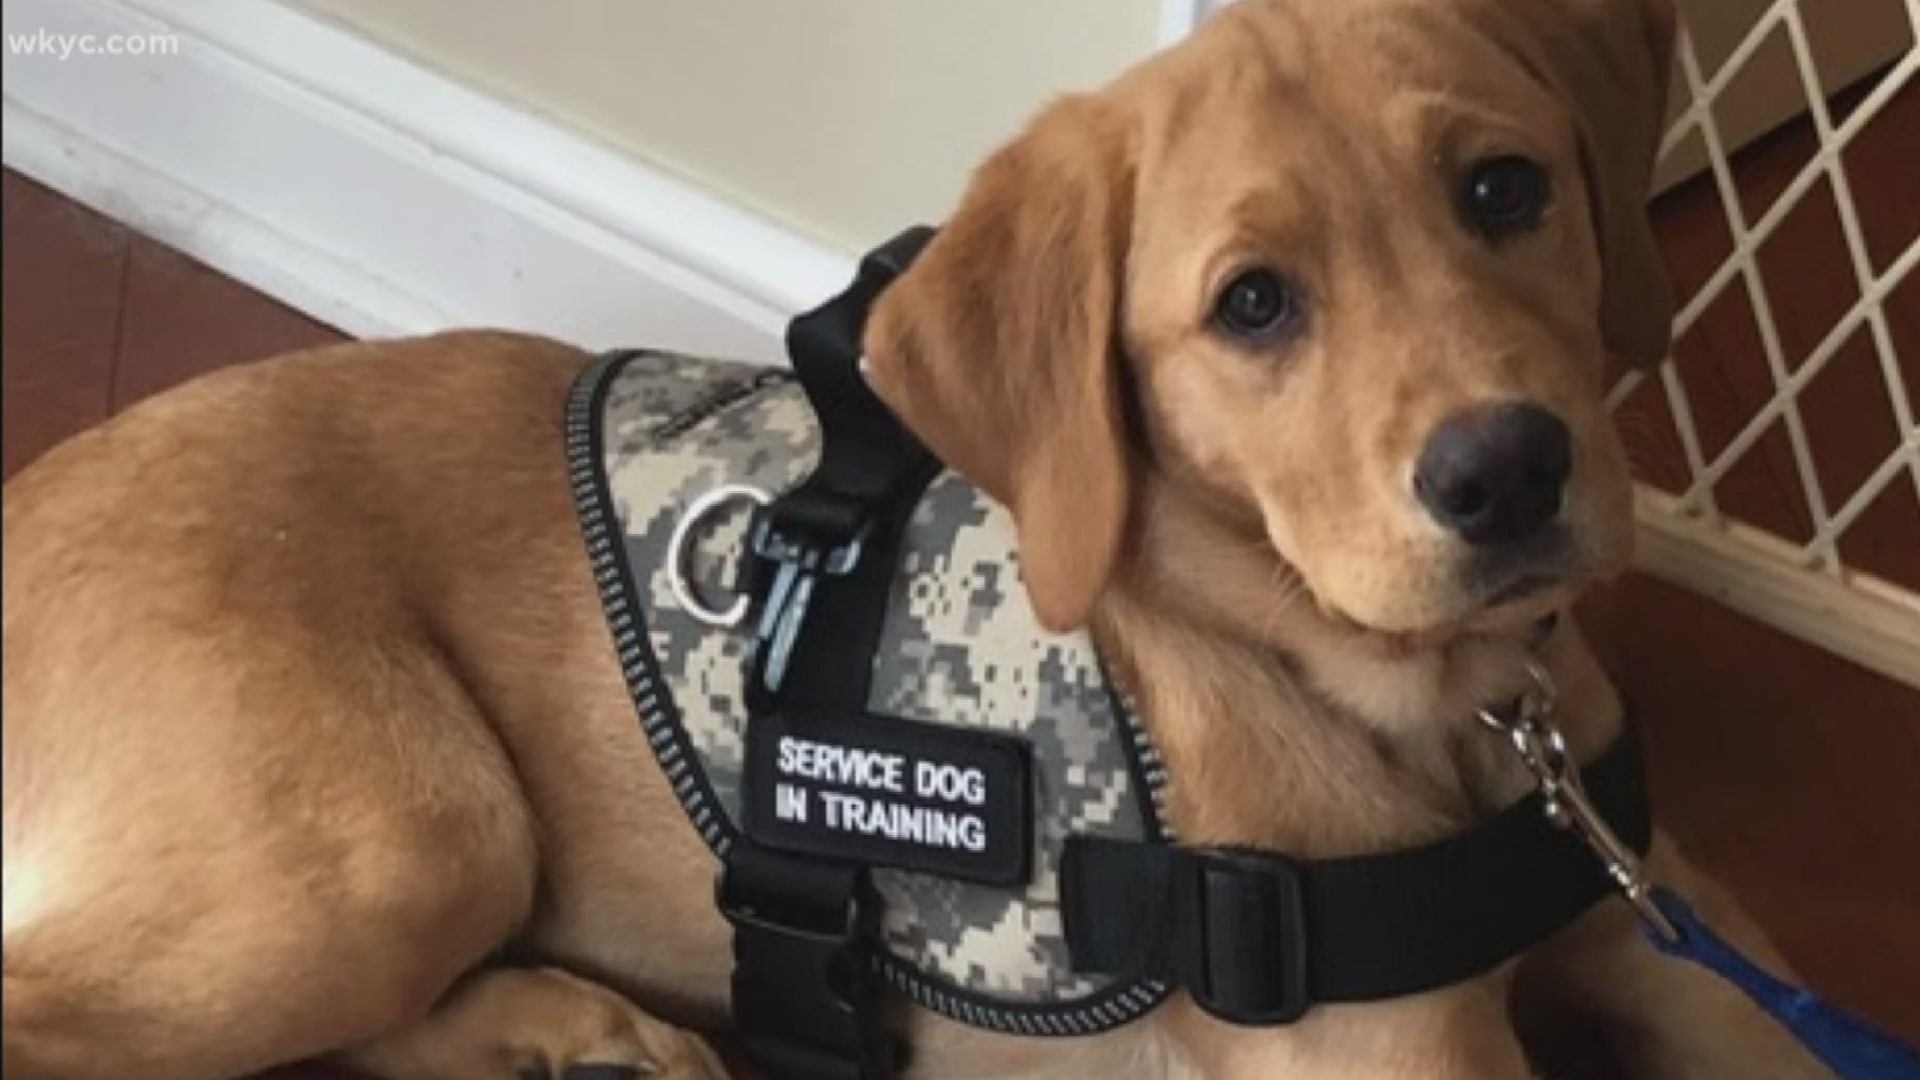 May 2, 2019: We are getting so many questions about Roxy, our Wags 4 Warriors service puppy in training. Keep sending them in!